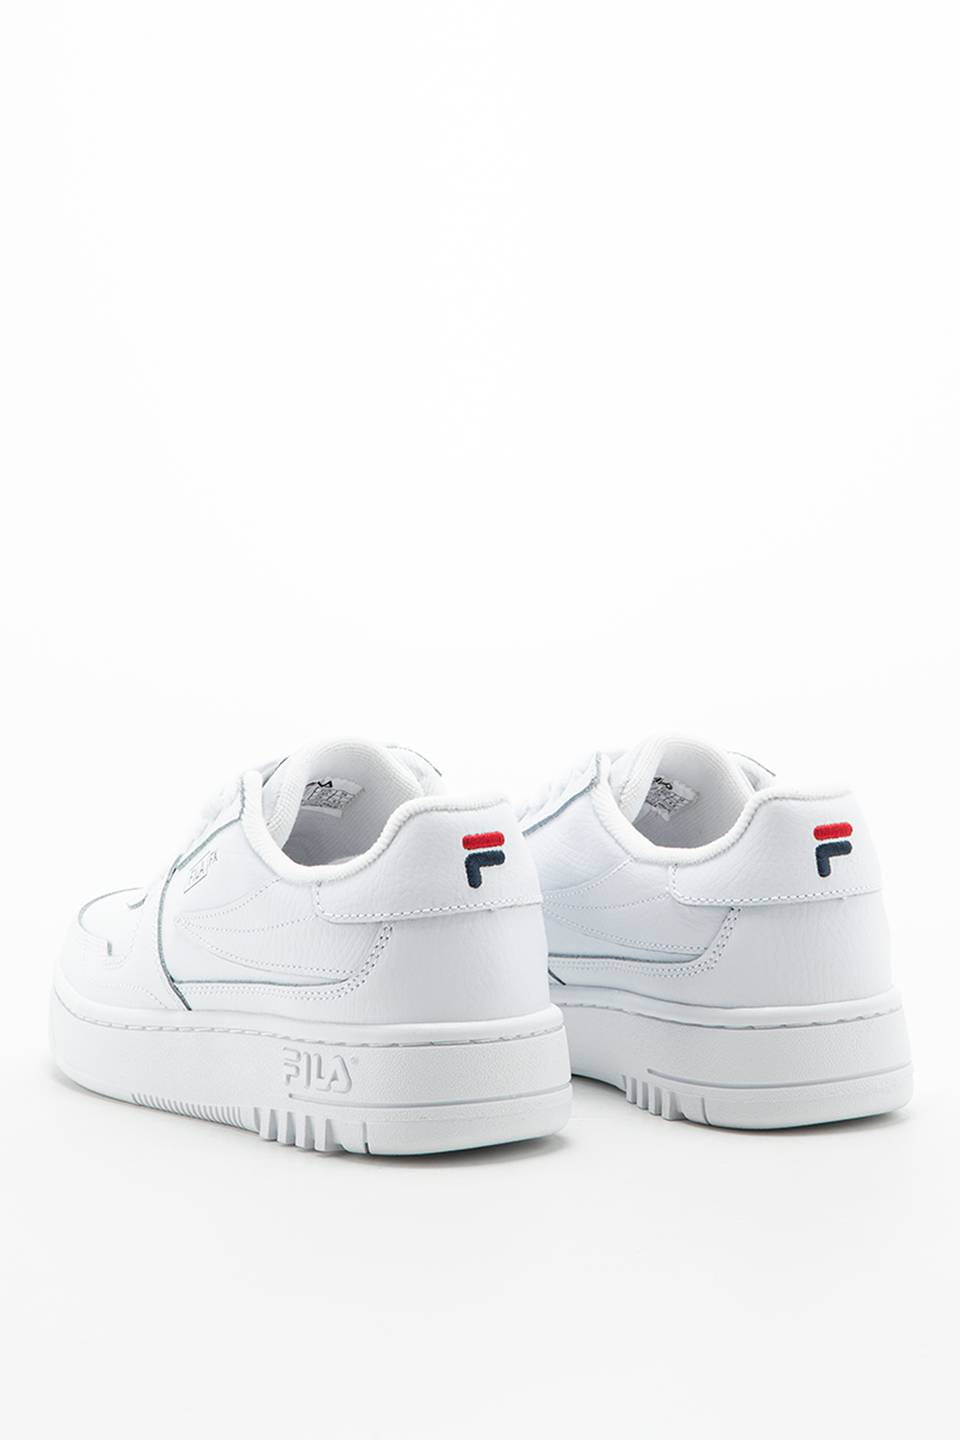 Sneakers Fila FXVENTUNO L low wmn White FFW0003-10004